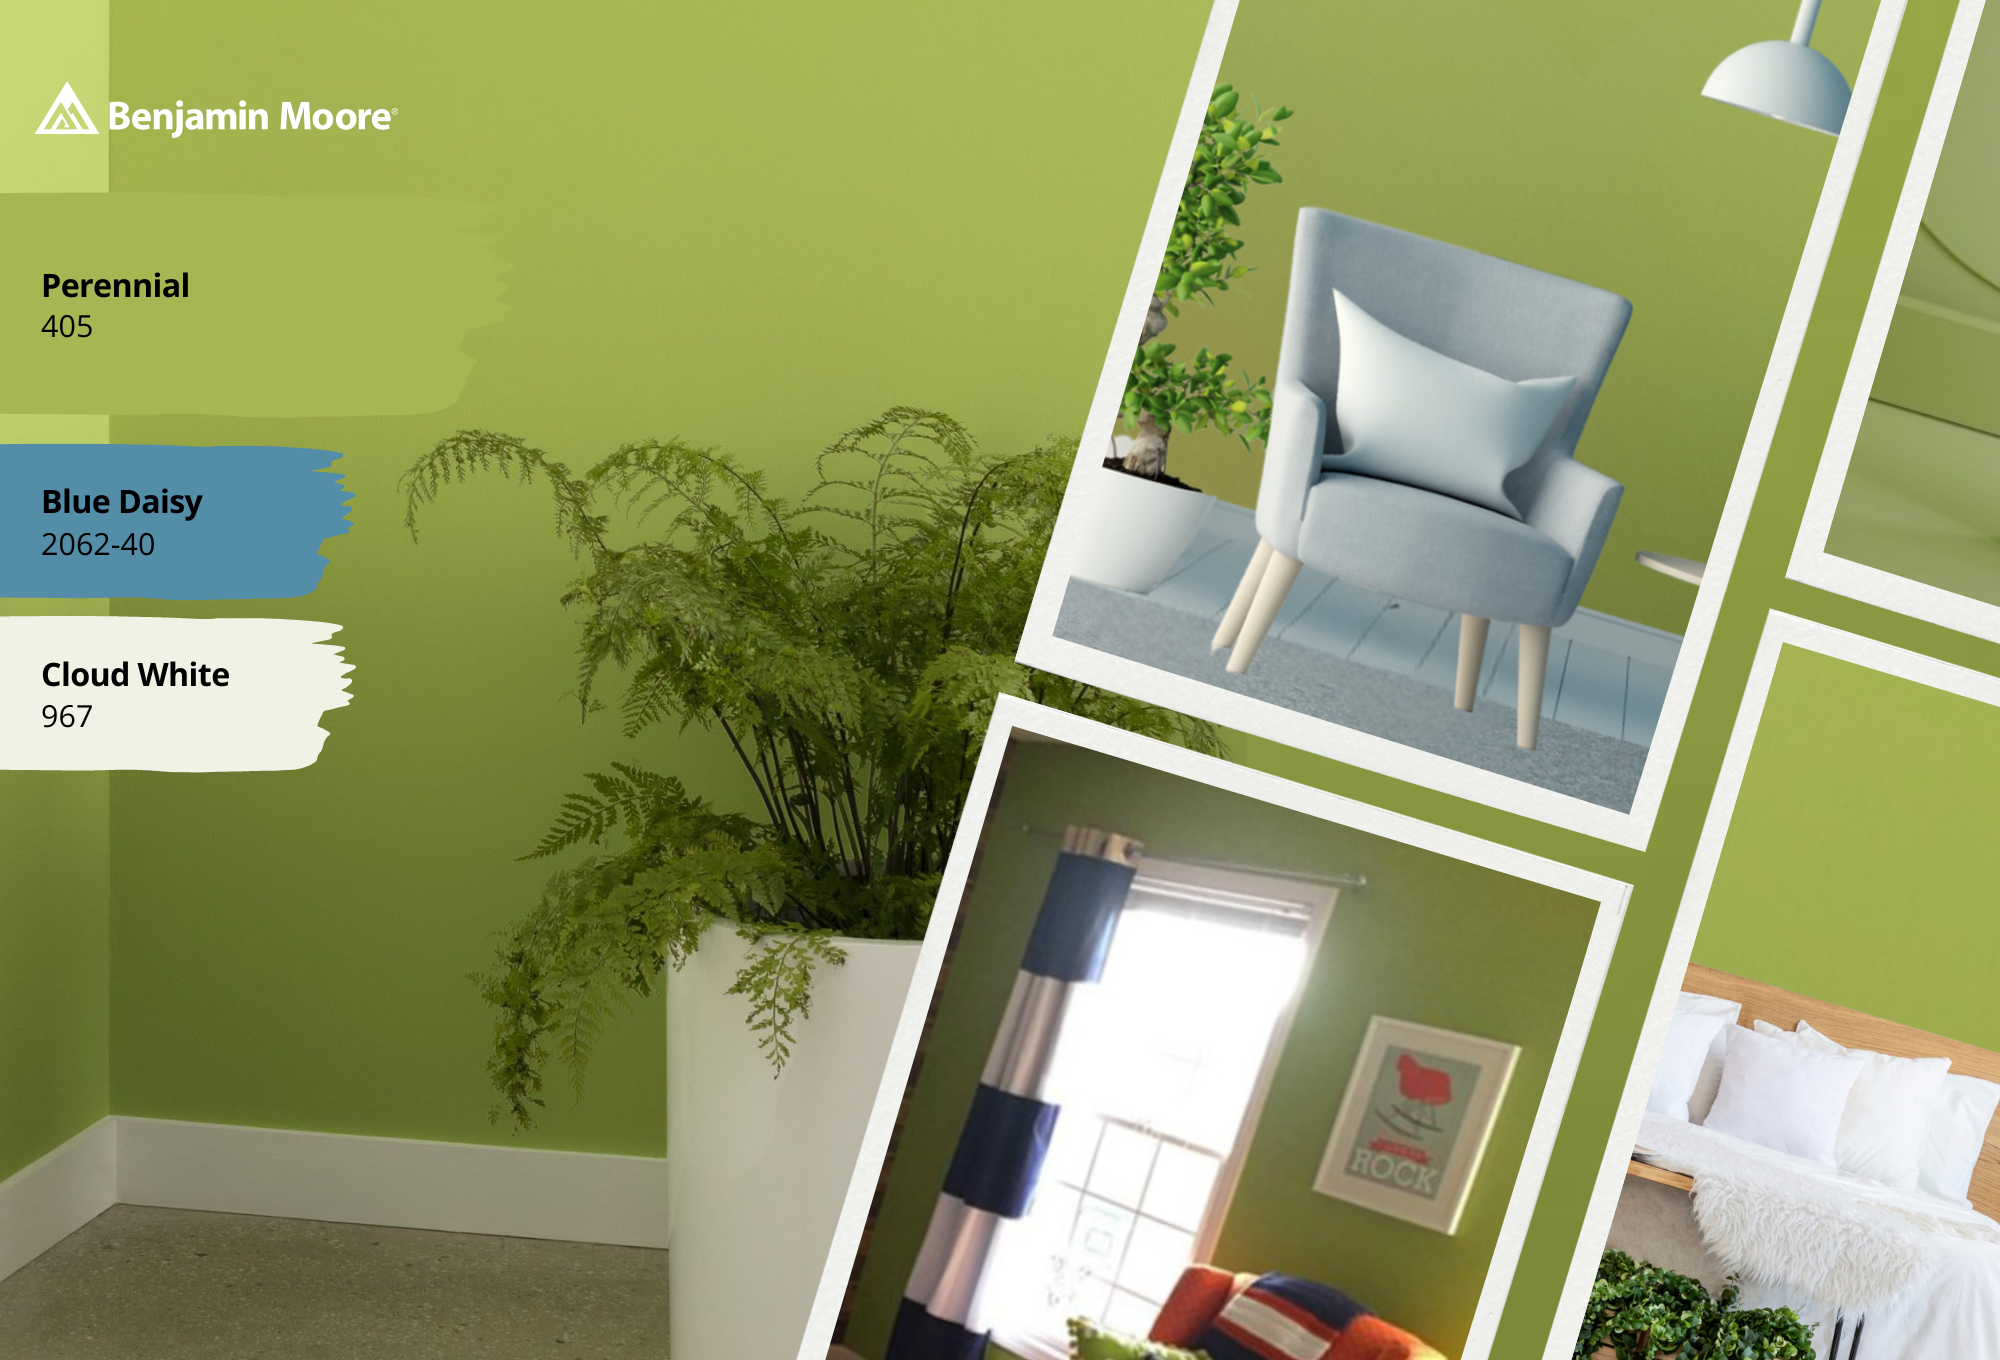 JC Licht’s Color of the Month April: Benjamin Moore Perennial 405